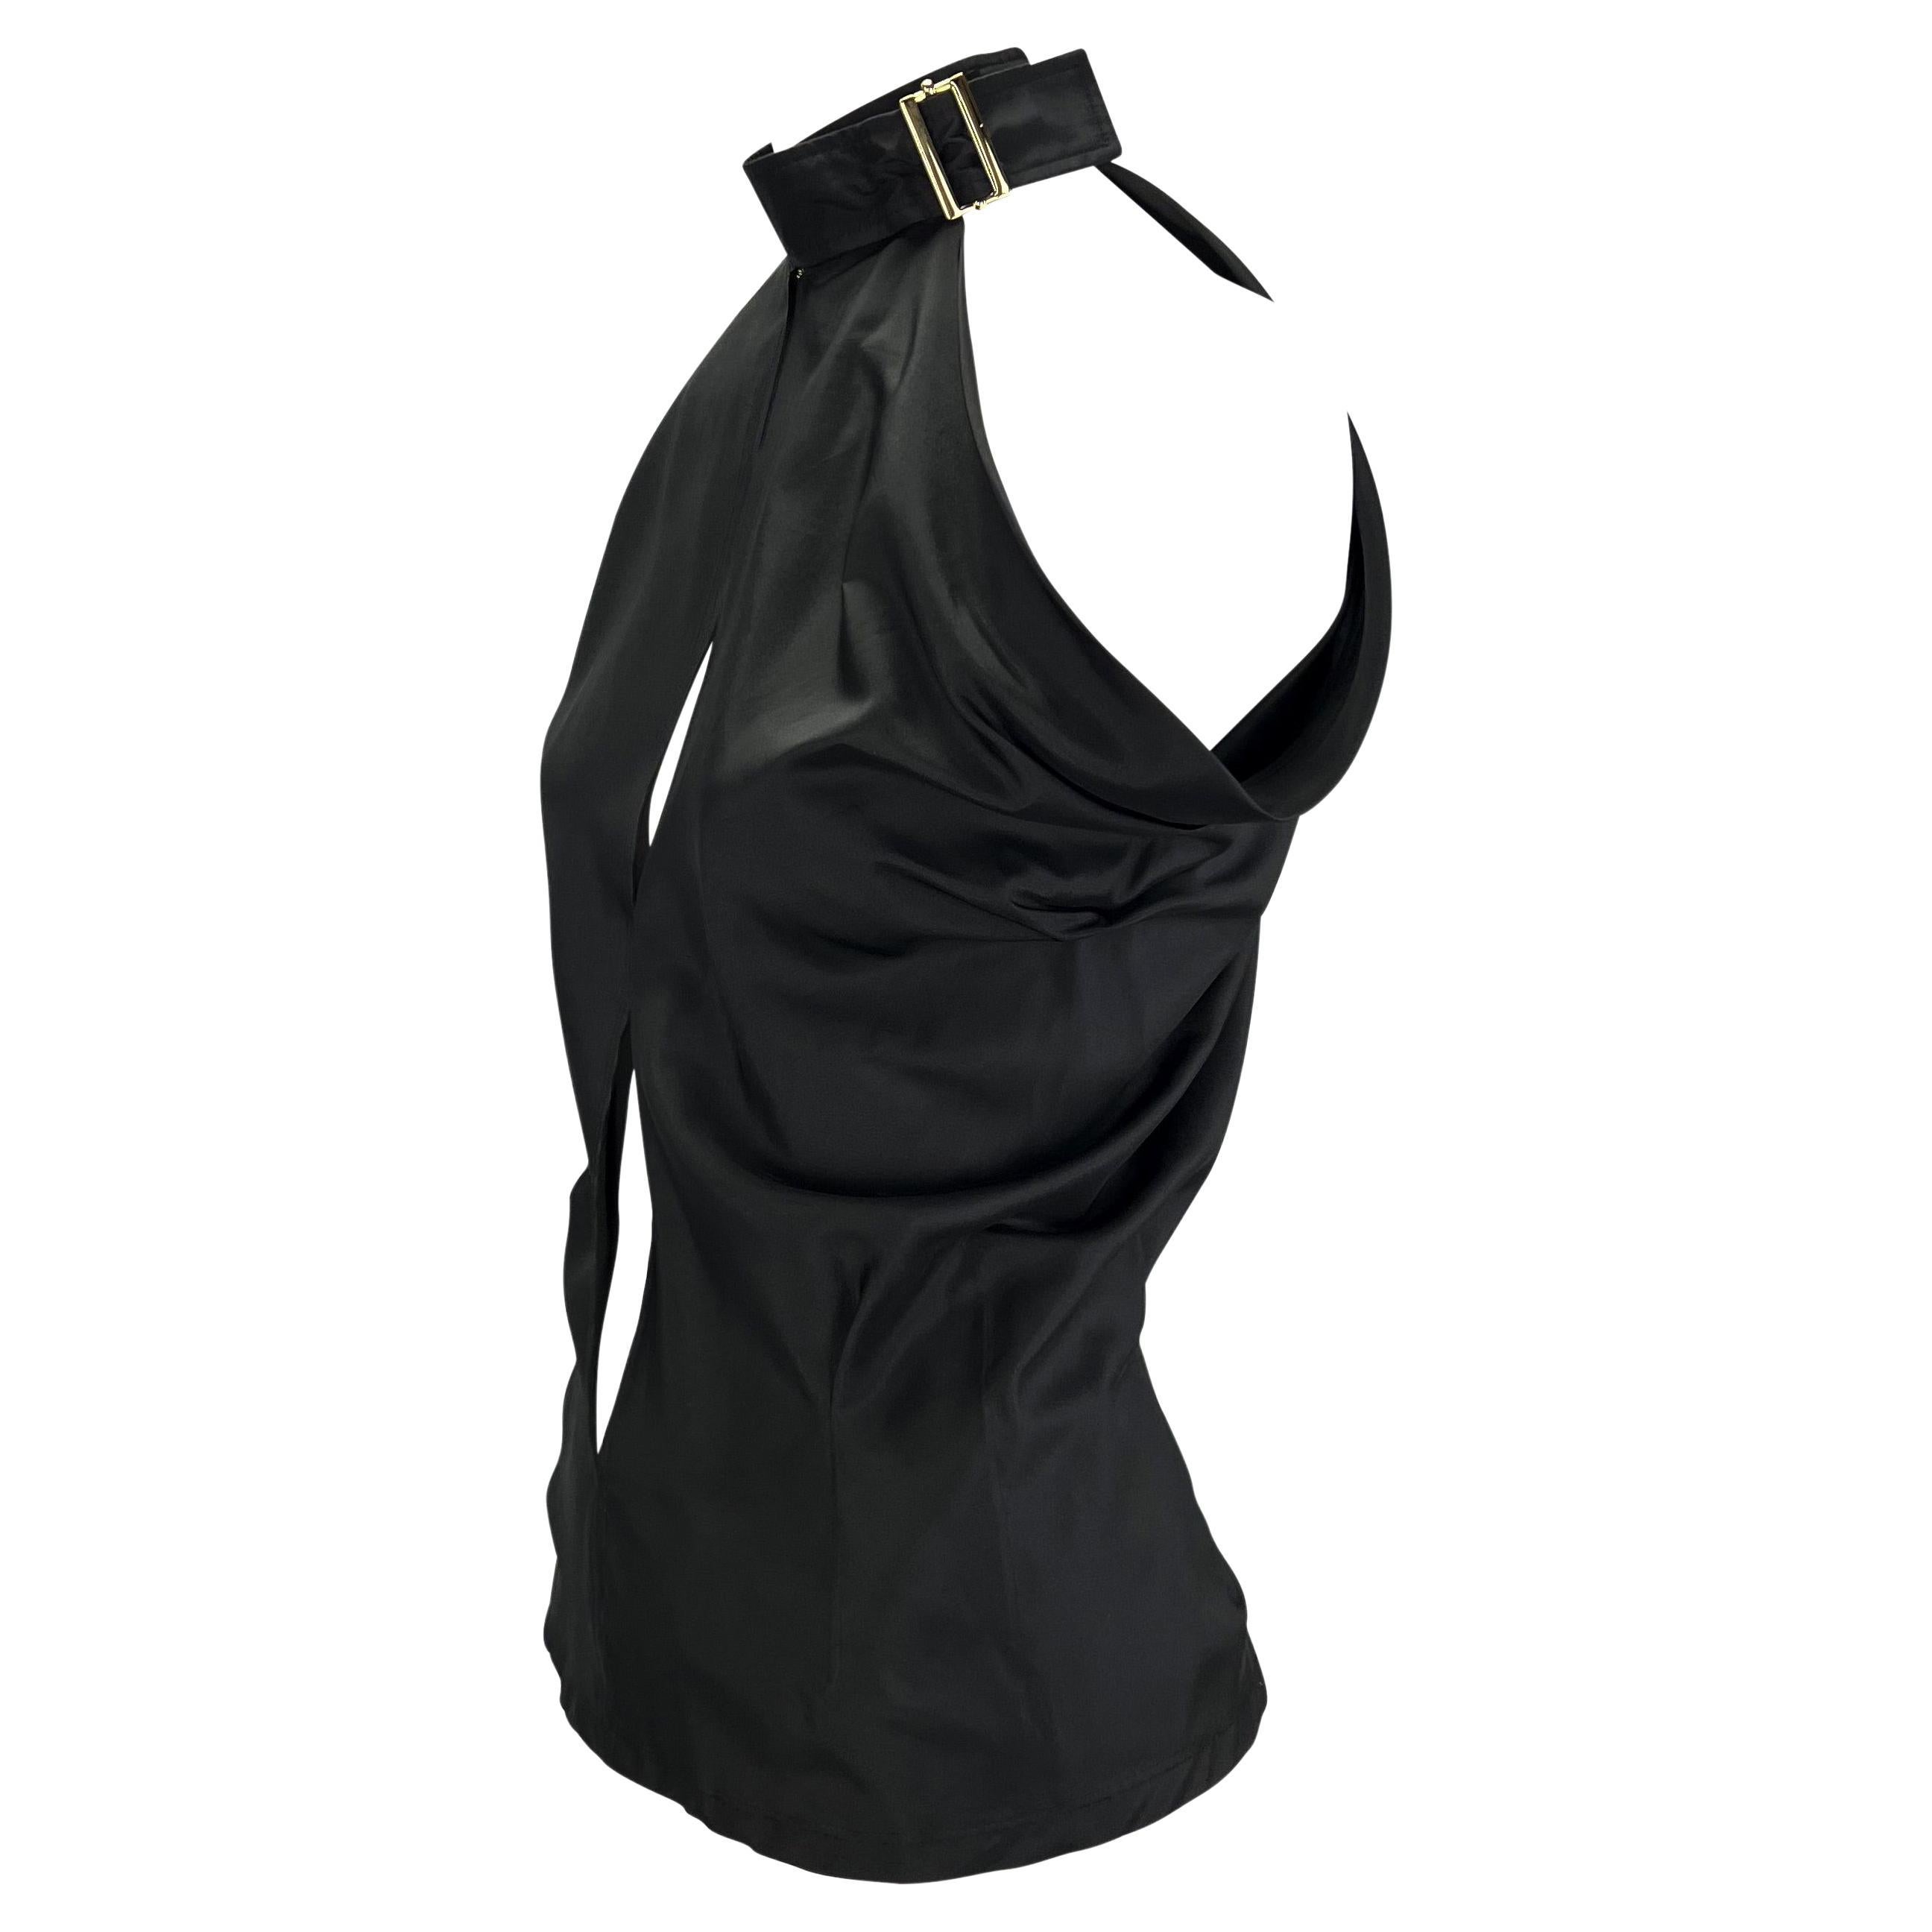 Presenting a gorgeous black silk plunging Yves Saint Laurent Rive Gauche top, designed by Tom Ford. From the Spring/Summer 2001 collection, this top features a ribbon collar with a gold accent buckle, gathered fabric at the underarms, and eyelets at